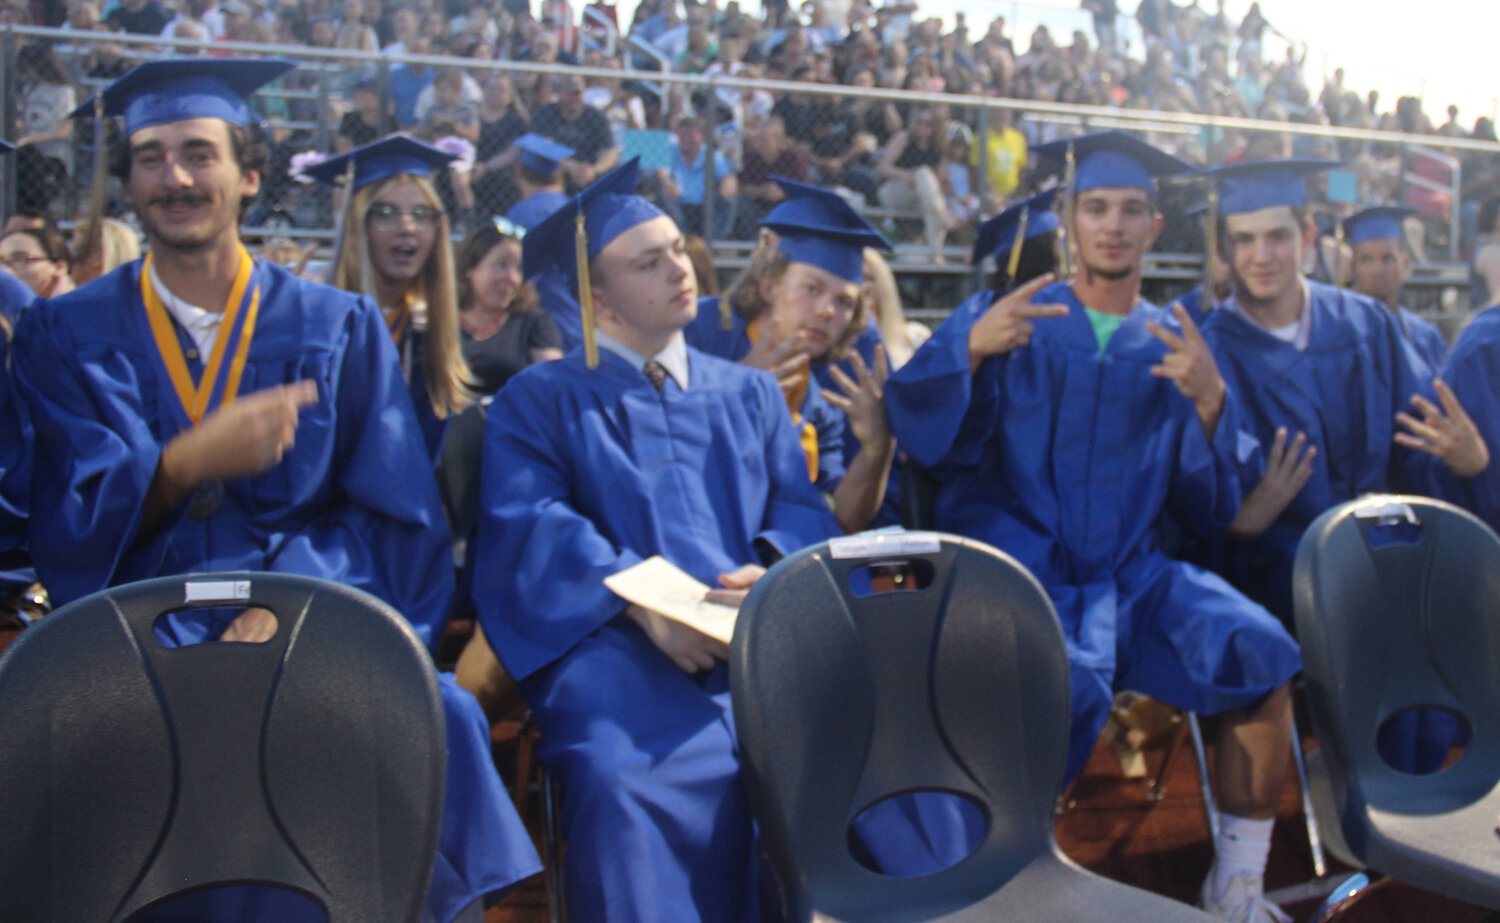 Wright City High School seniors have some fun while they wait for their chance to cross the graduation stage.